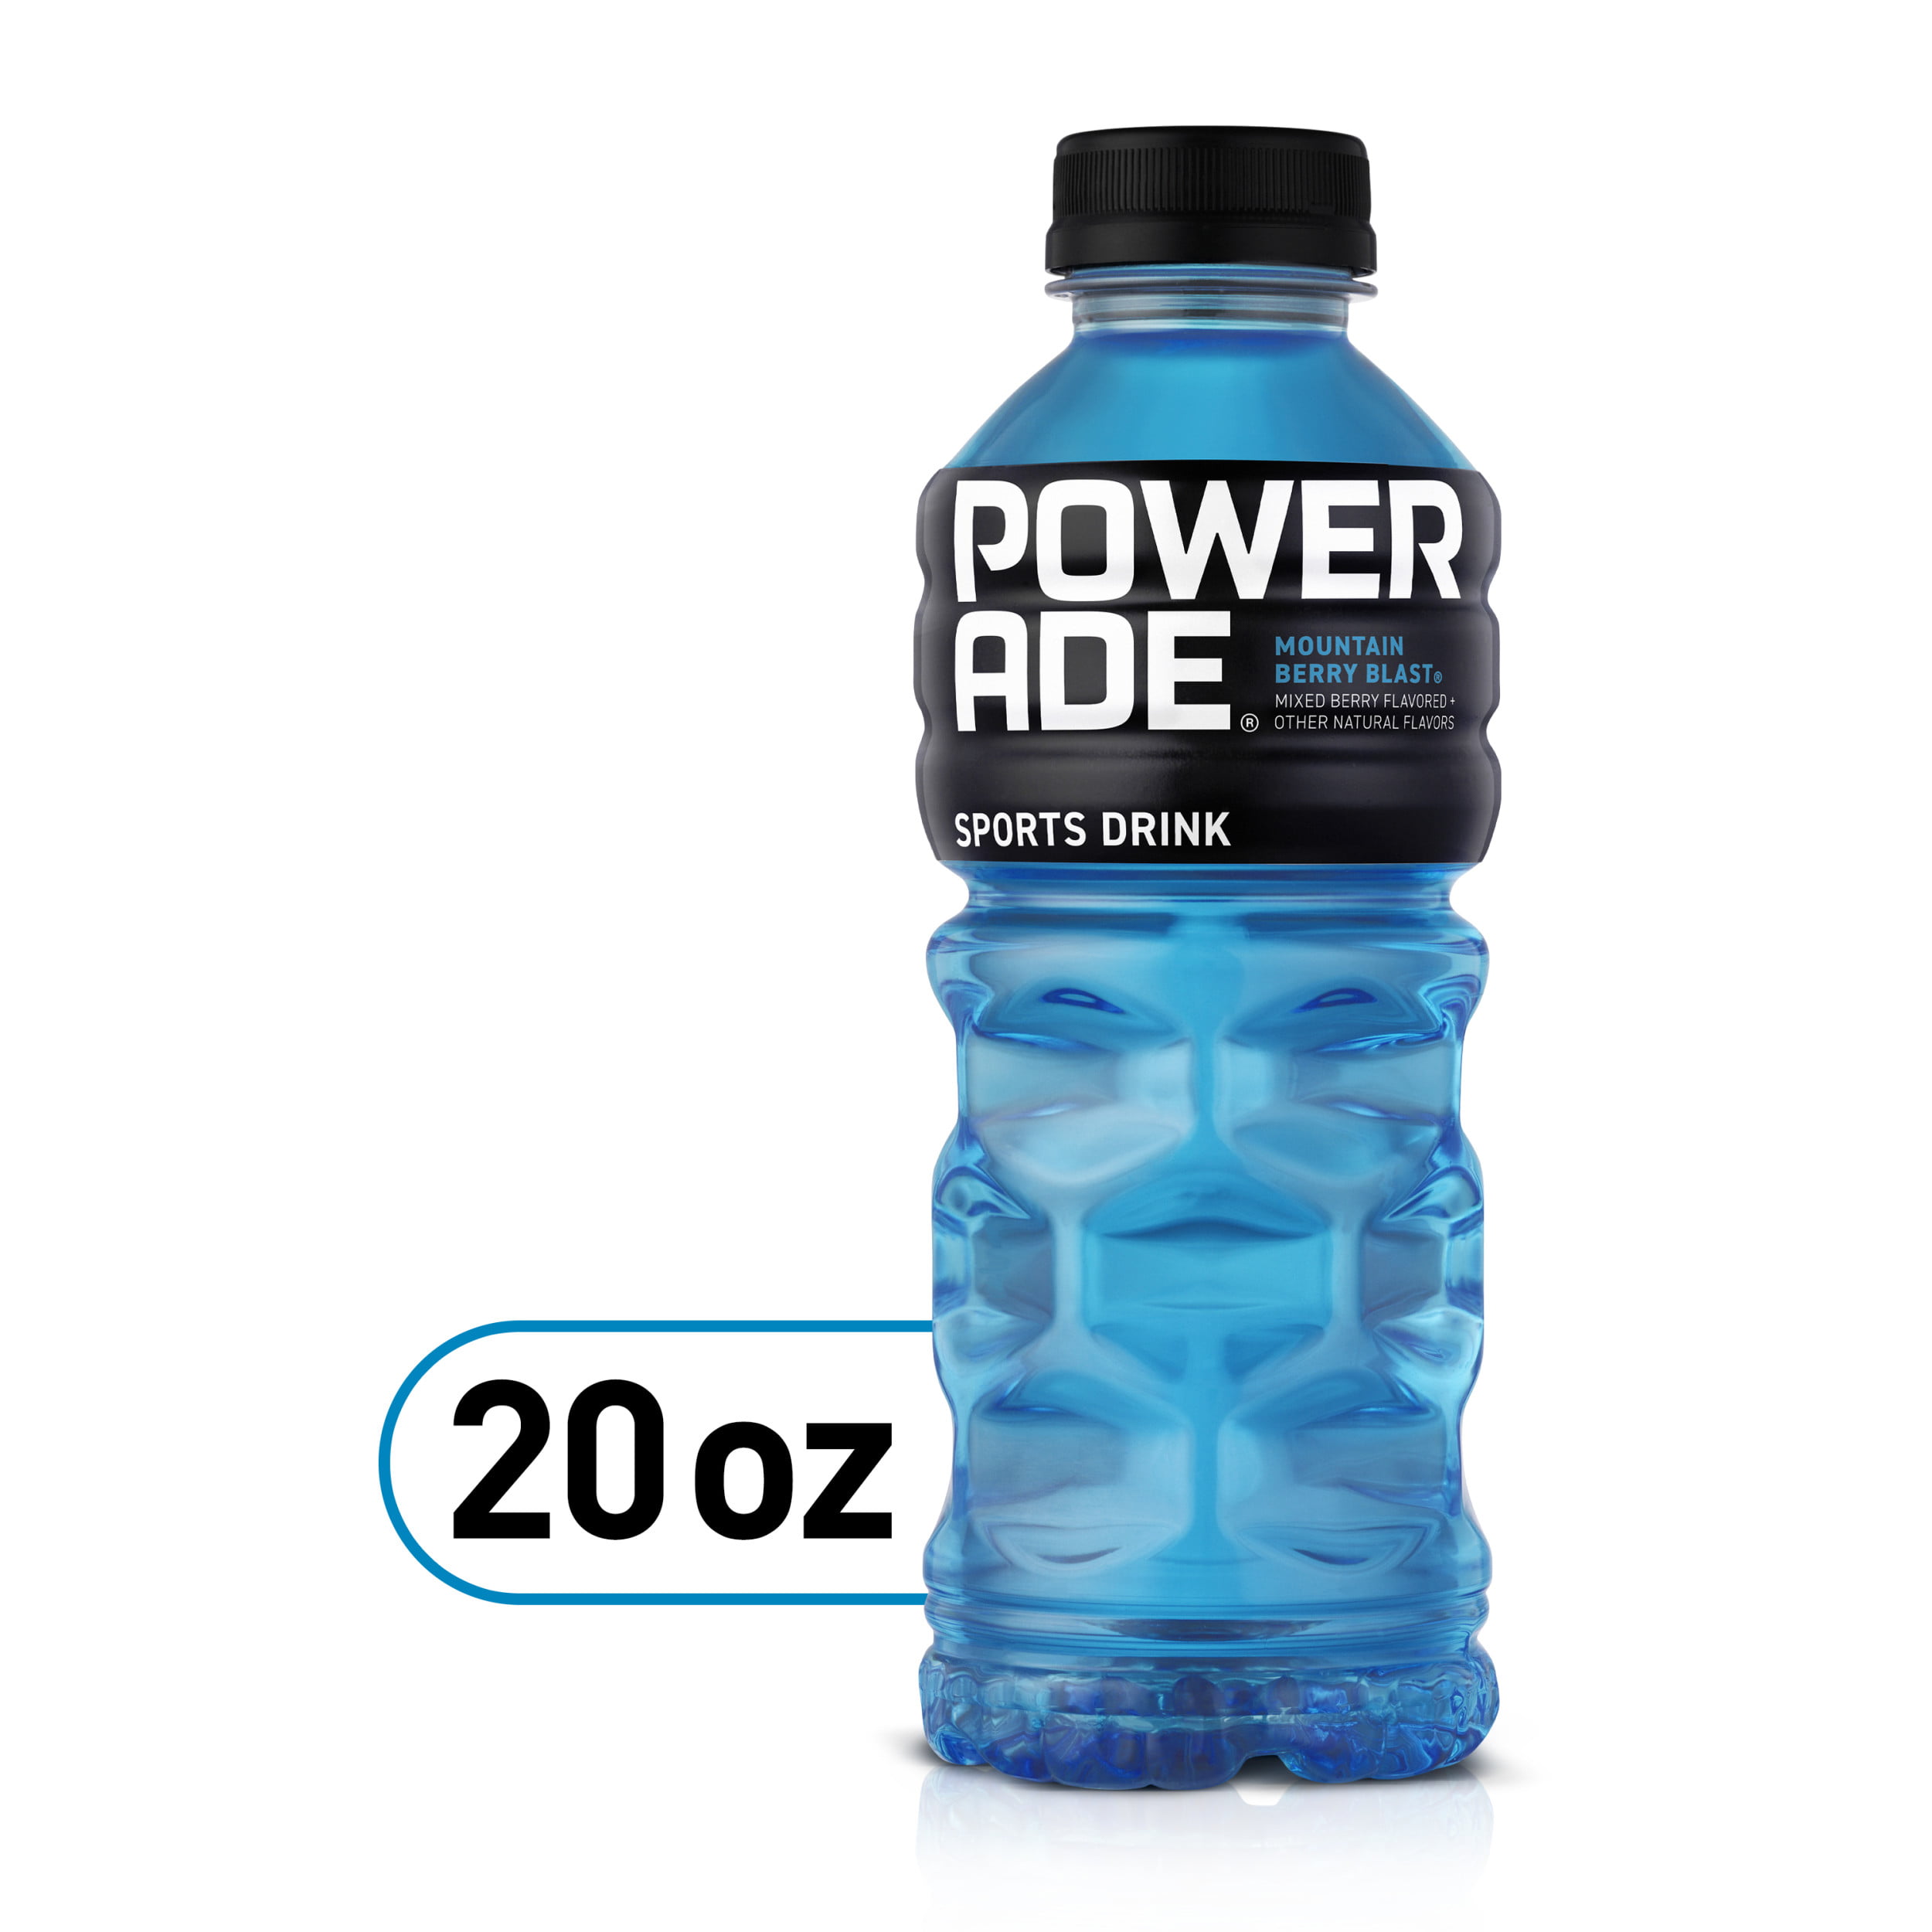 15 X 18 Inches Powerade Small Towel Brand New Blue and Black 